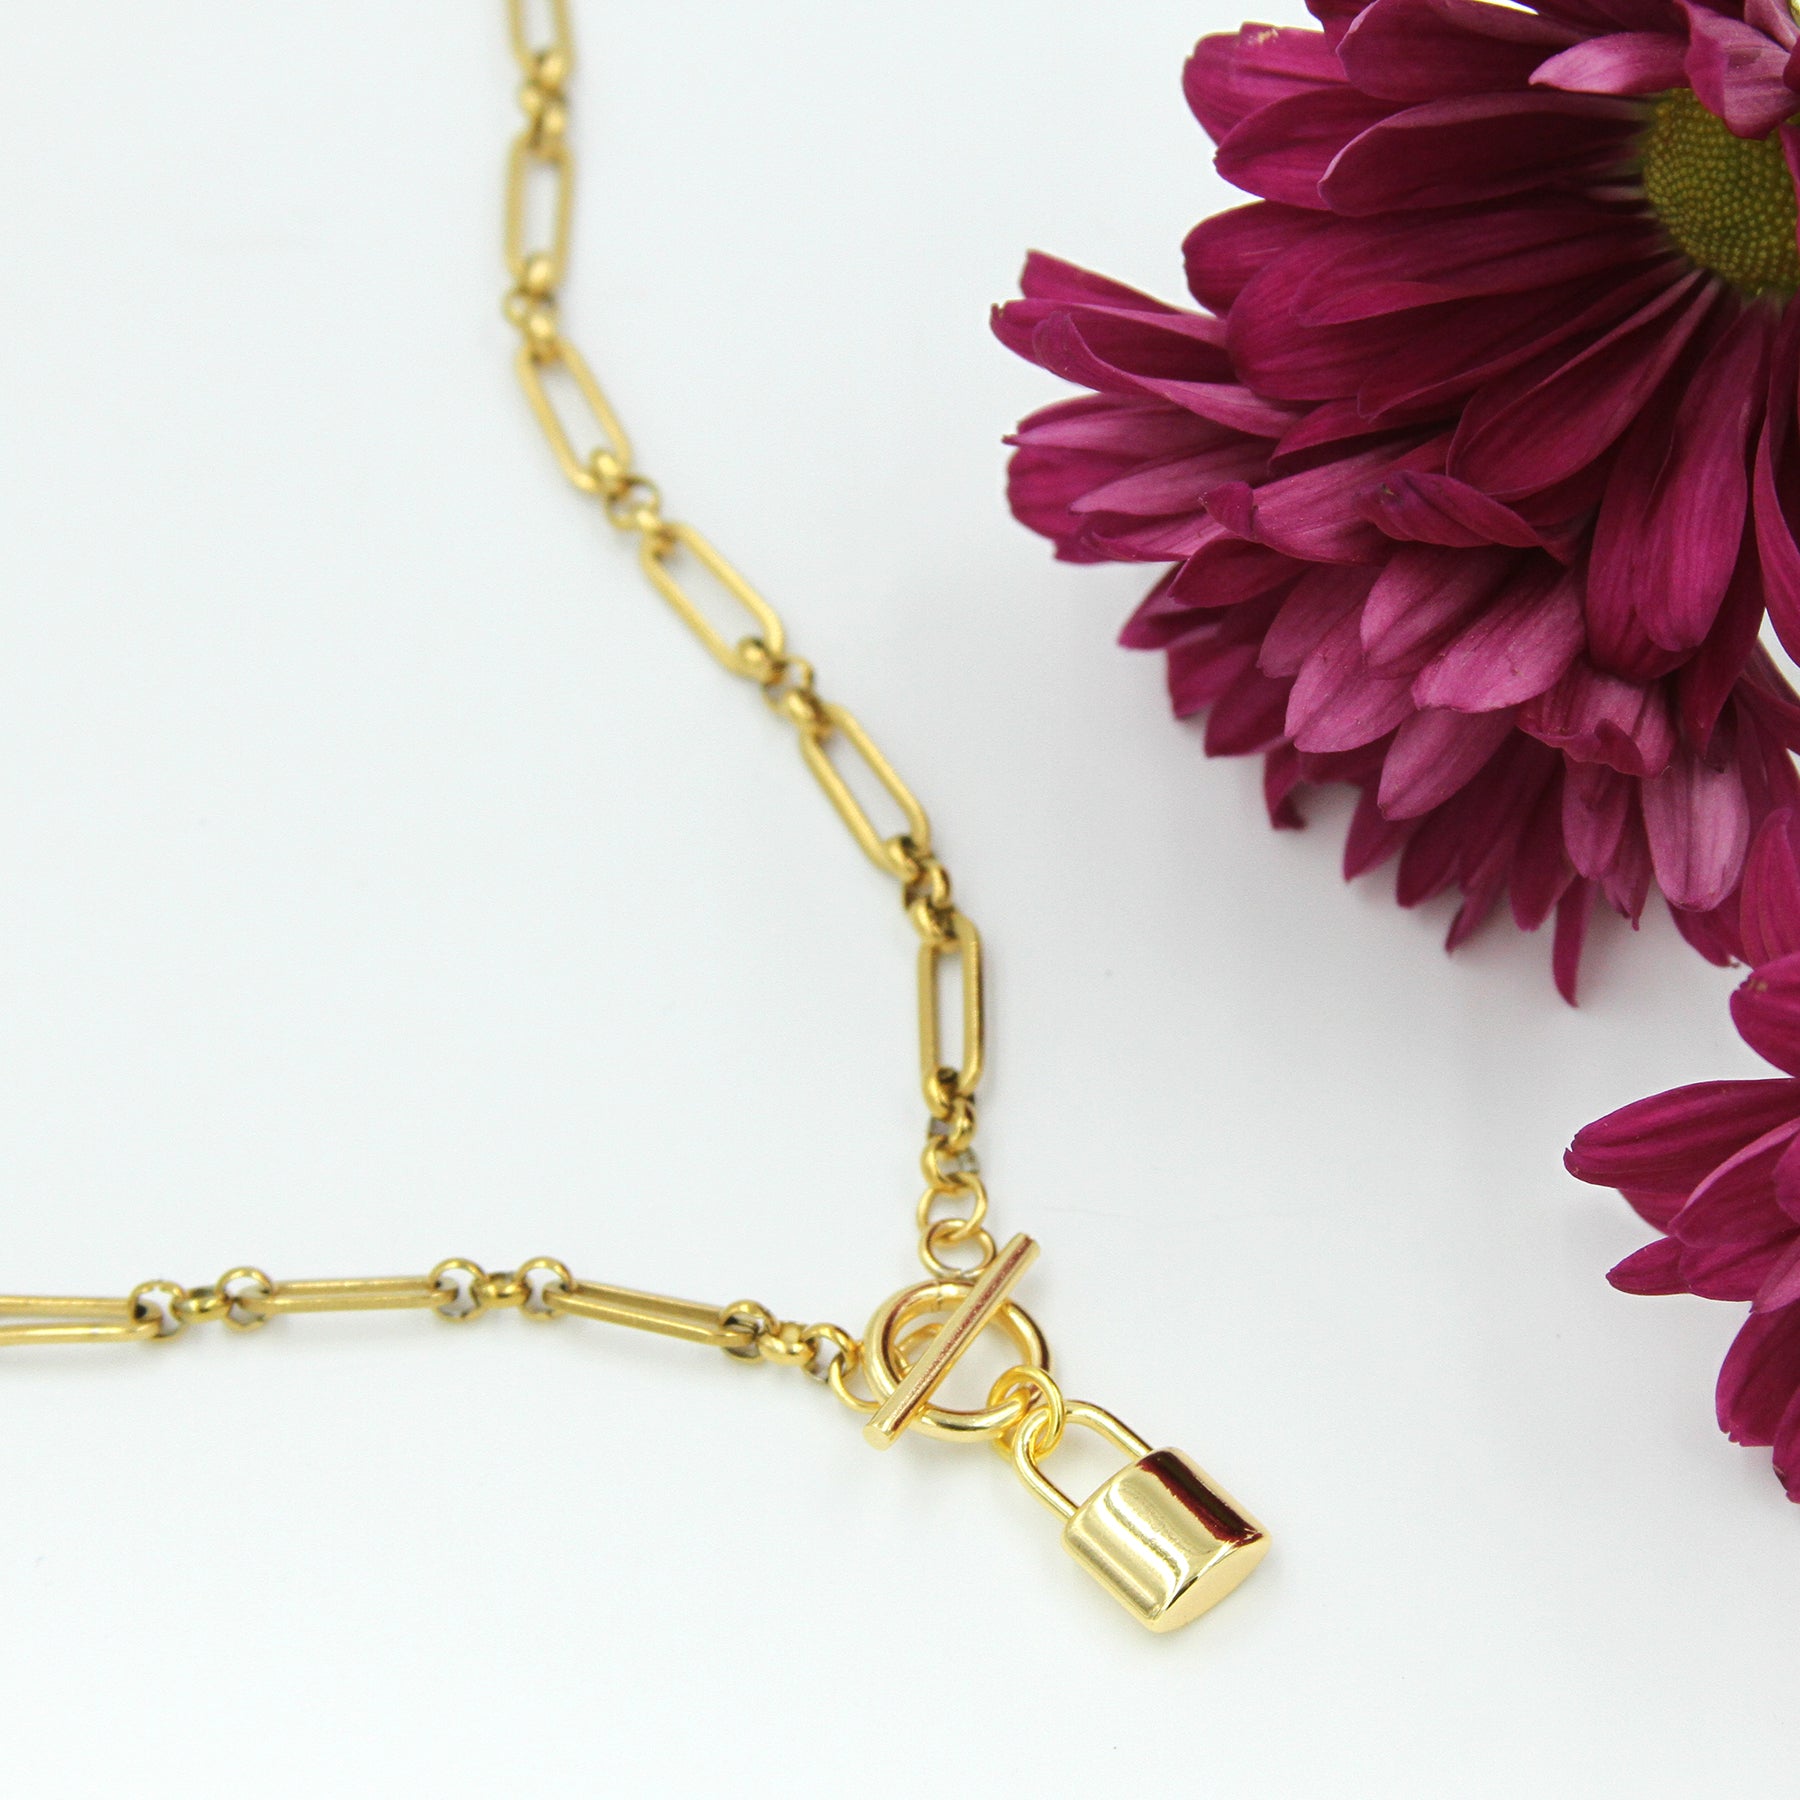 Nolita Padlock Figaro Chain Toggle Necklace - Sunday Girl by Amy DiLamarraNecklaces